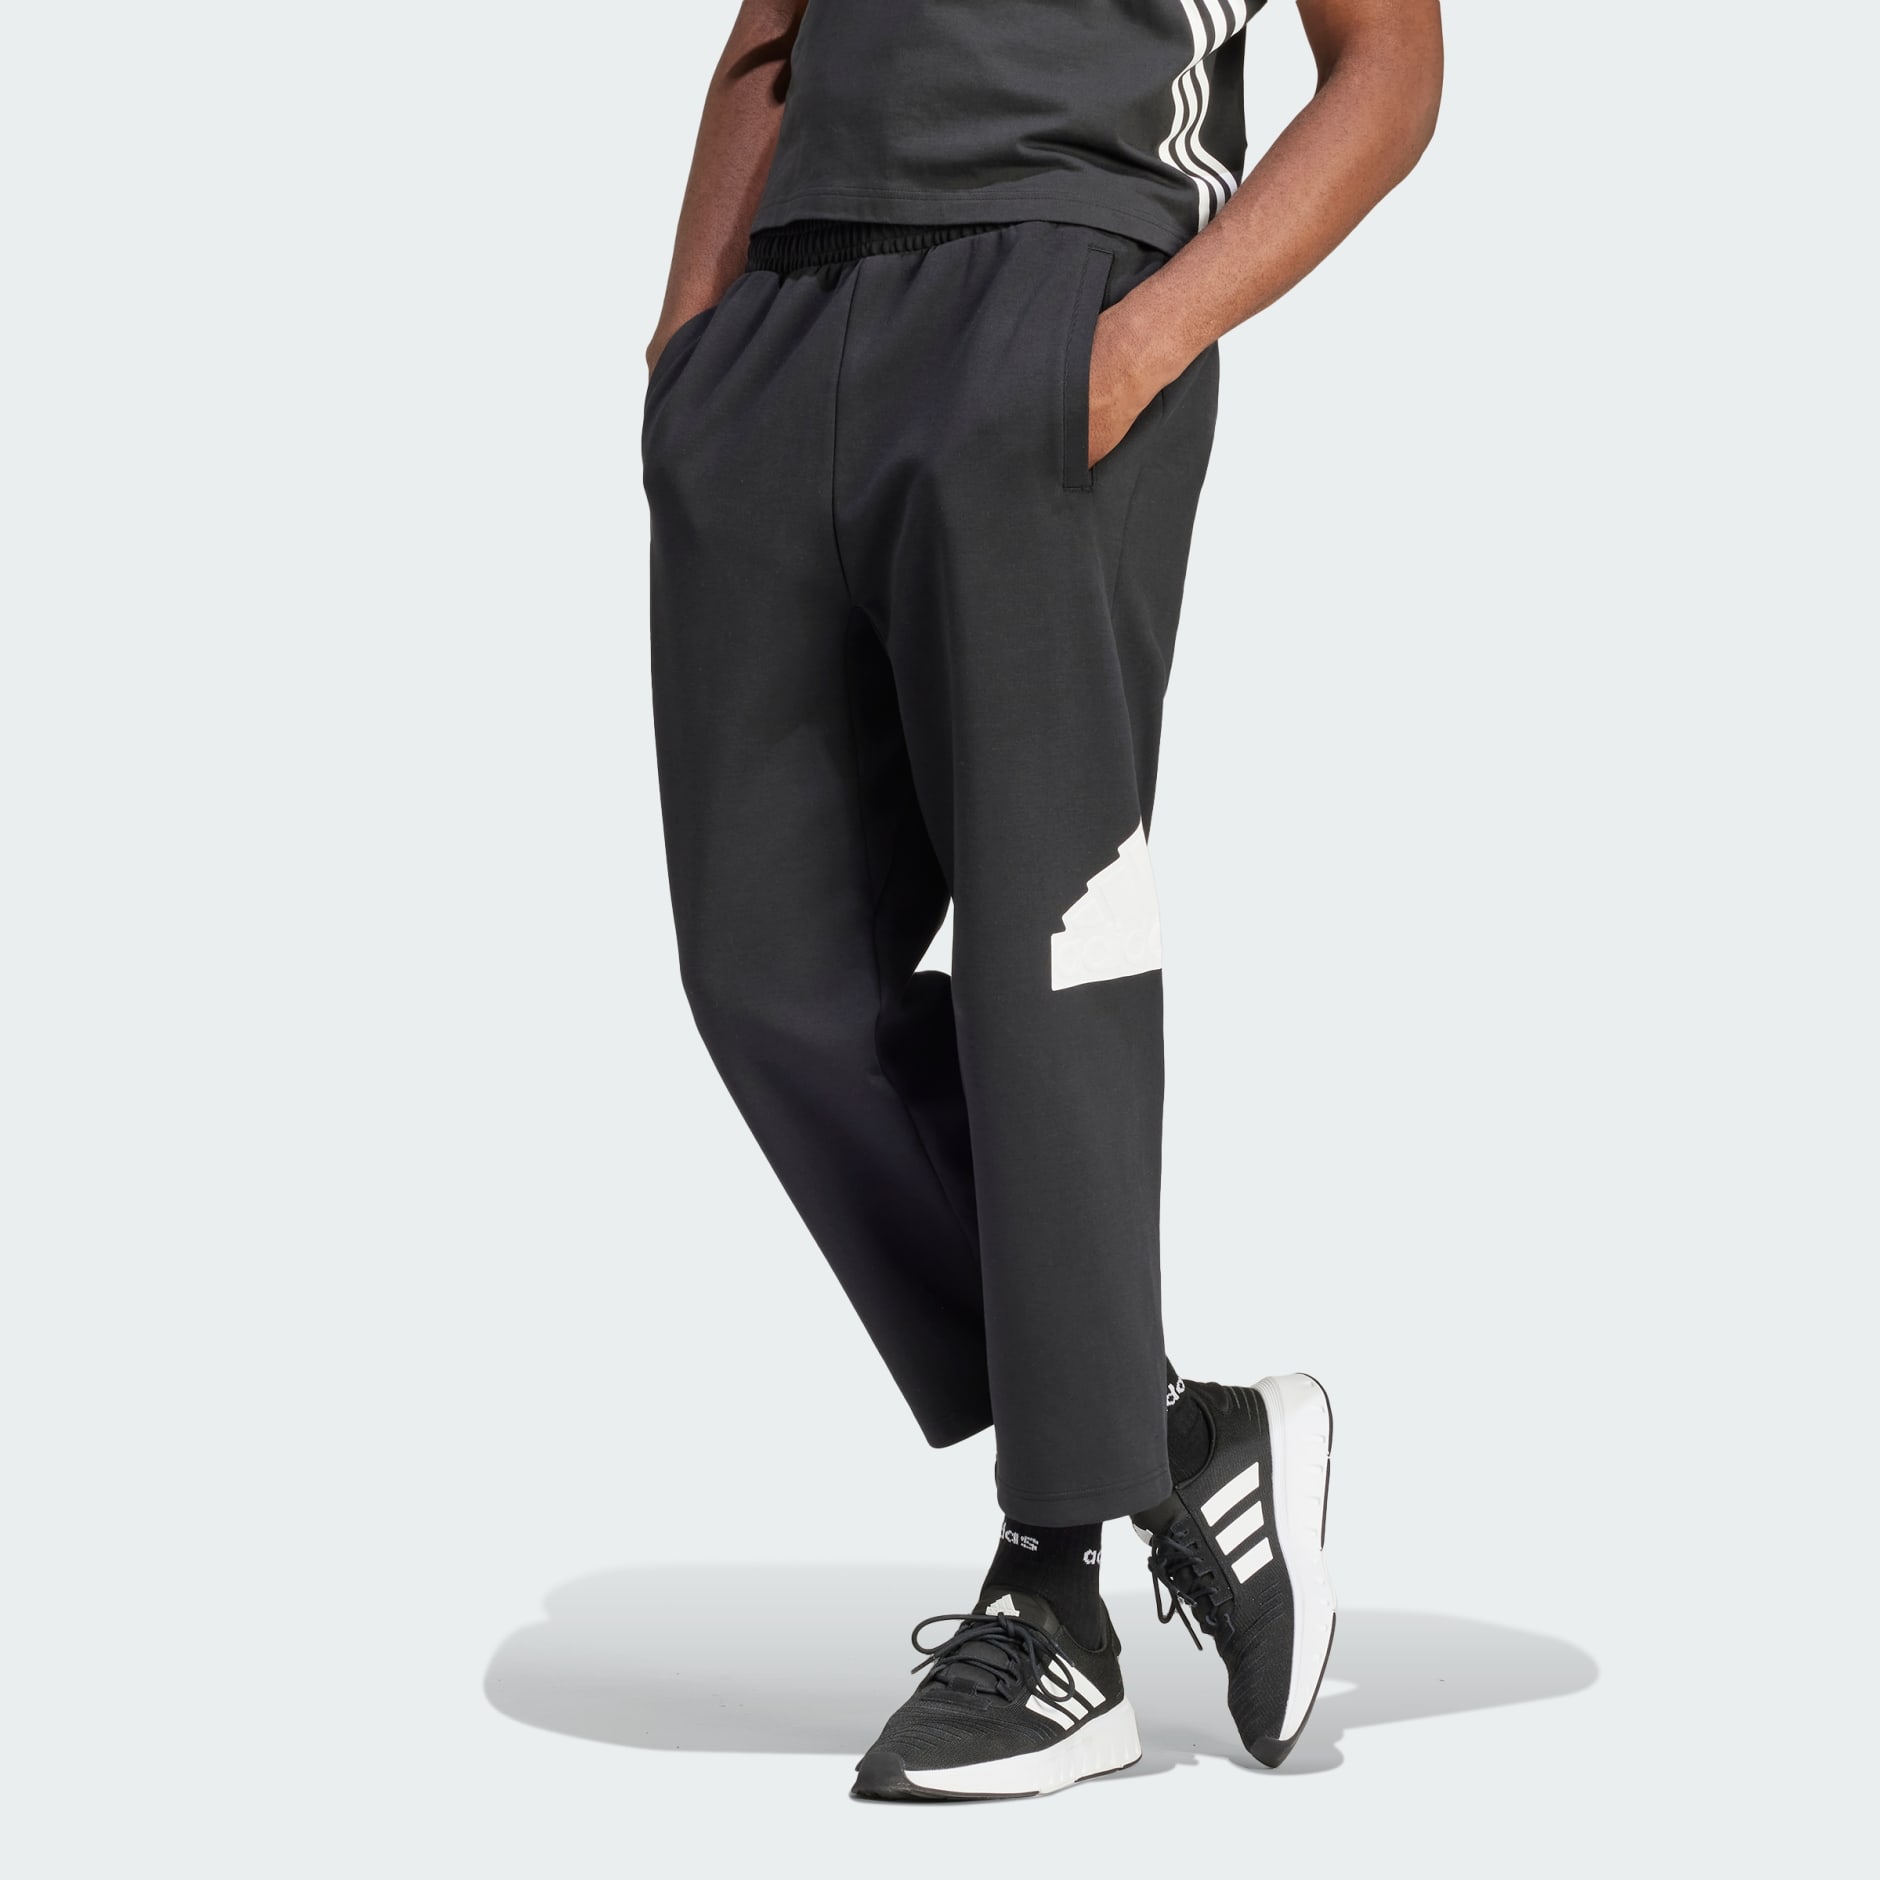 adidas Twill Trackpants for women, black - Buy online! - HERE